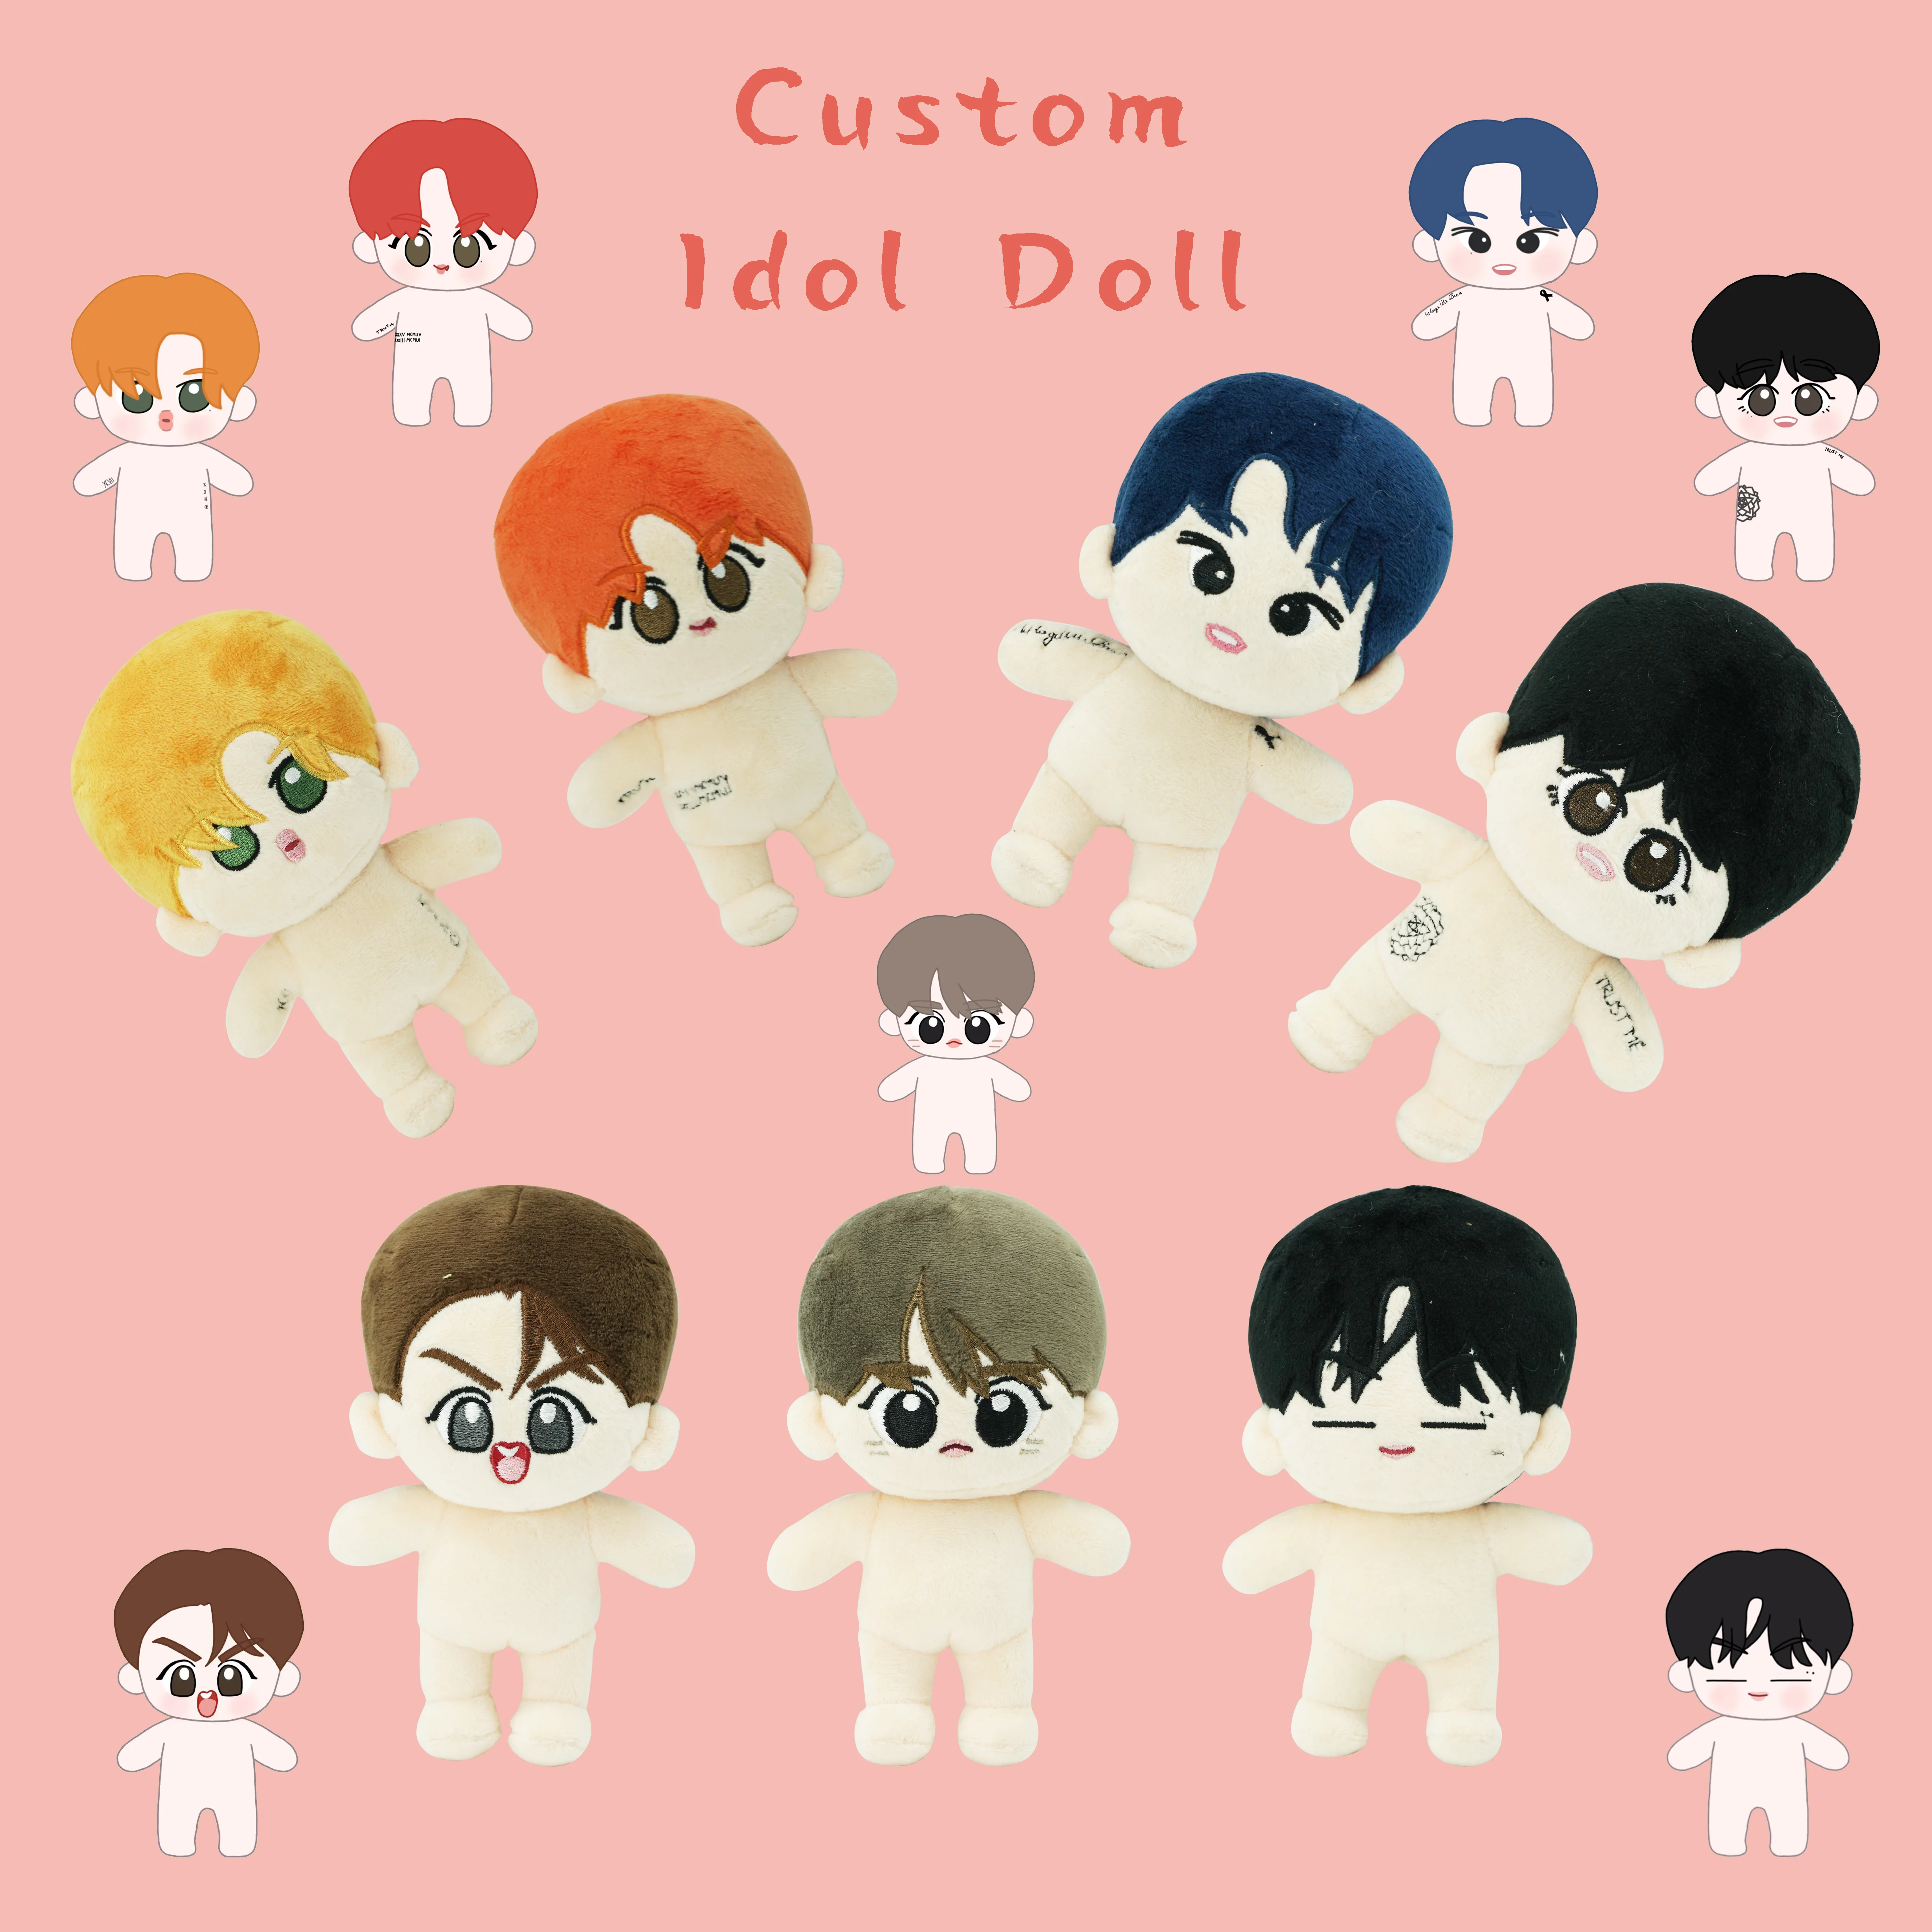 

Custom Group Star Dolls Custom Idol Dolls Of Star Combination Promotional Gifts About Idols Perfec Gift Souvenir For Fans